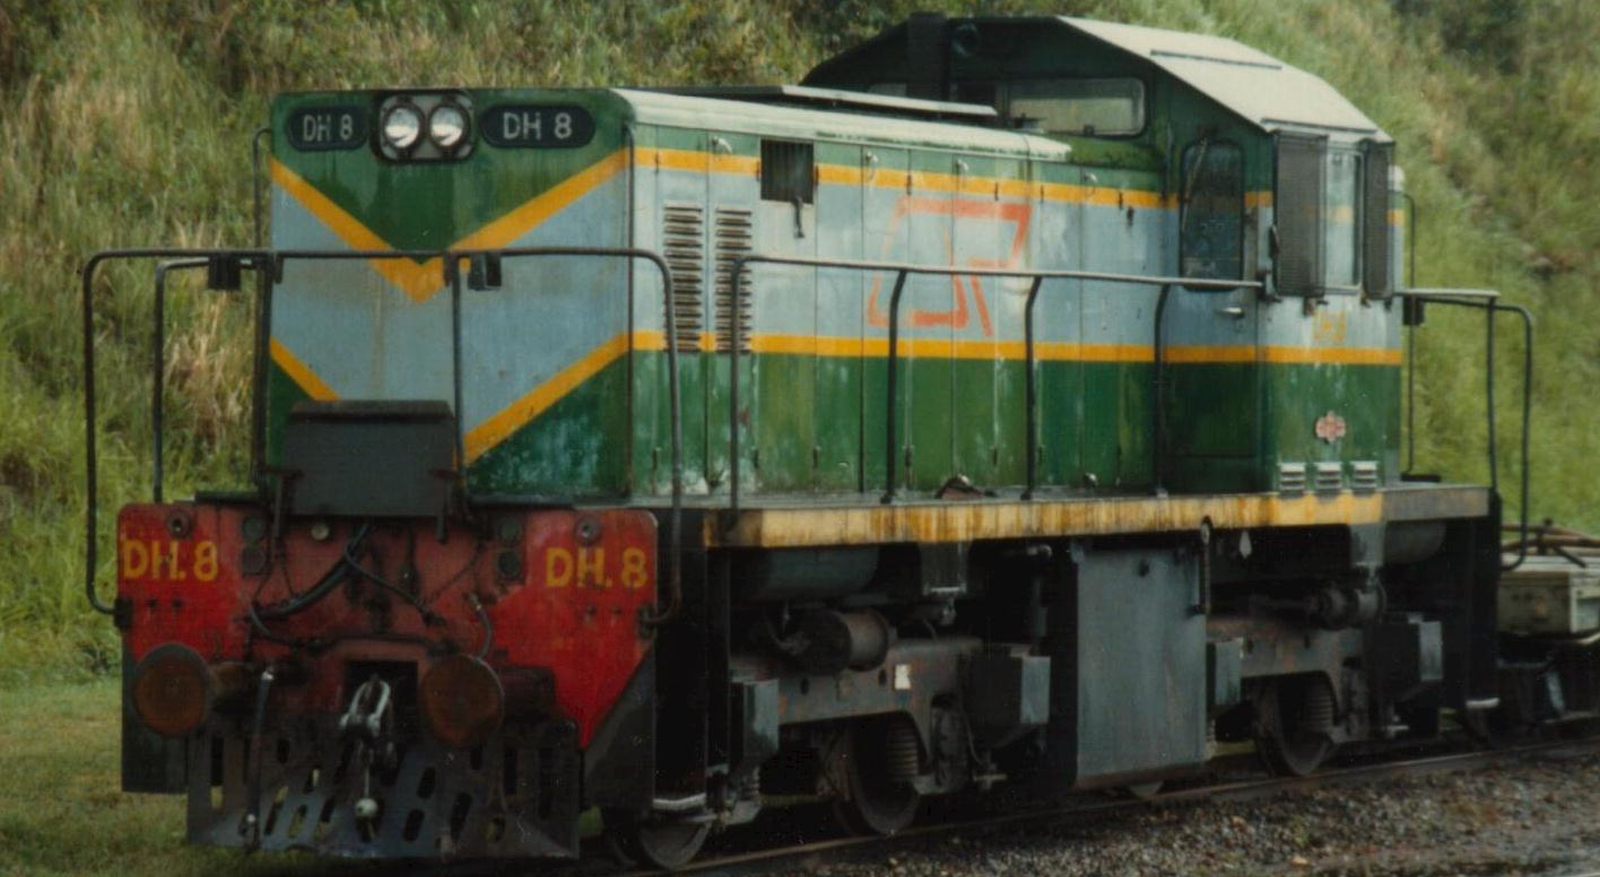 DH No. 8 in May 1986 at Innisfail, Queensland